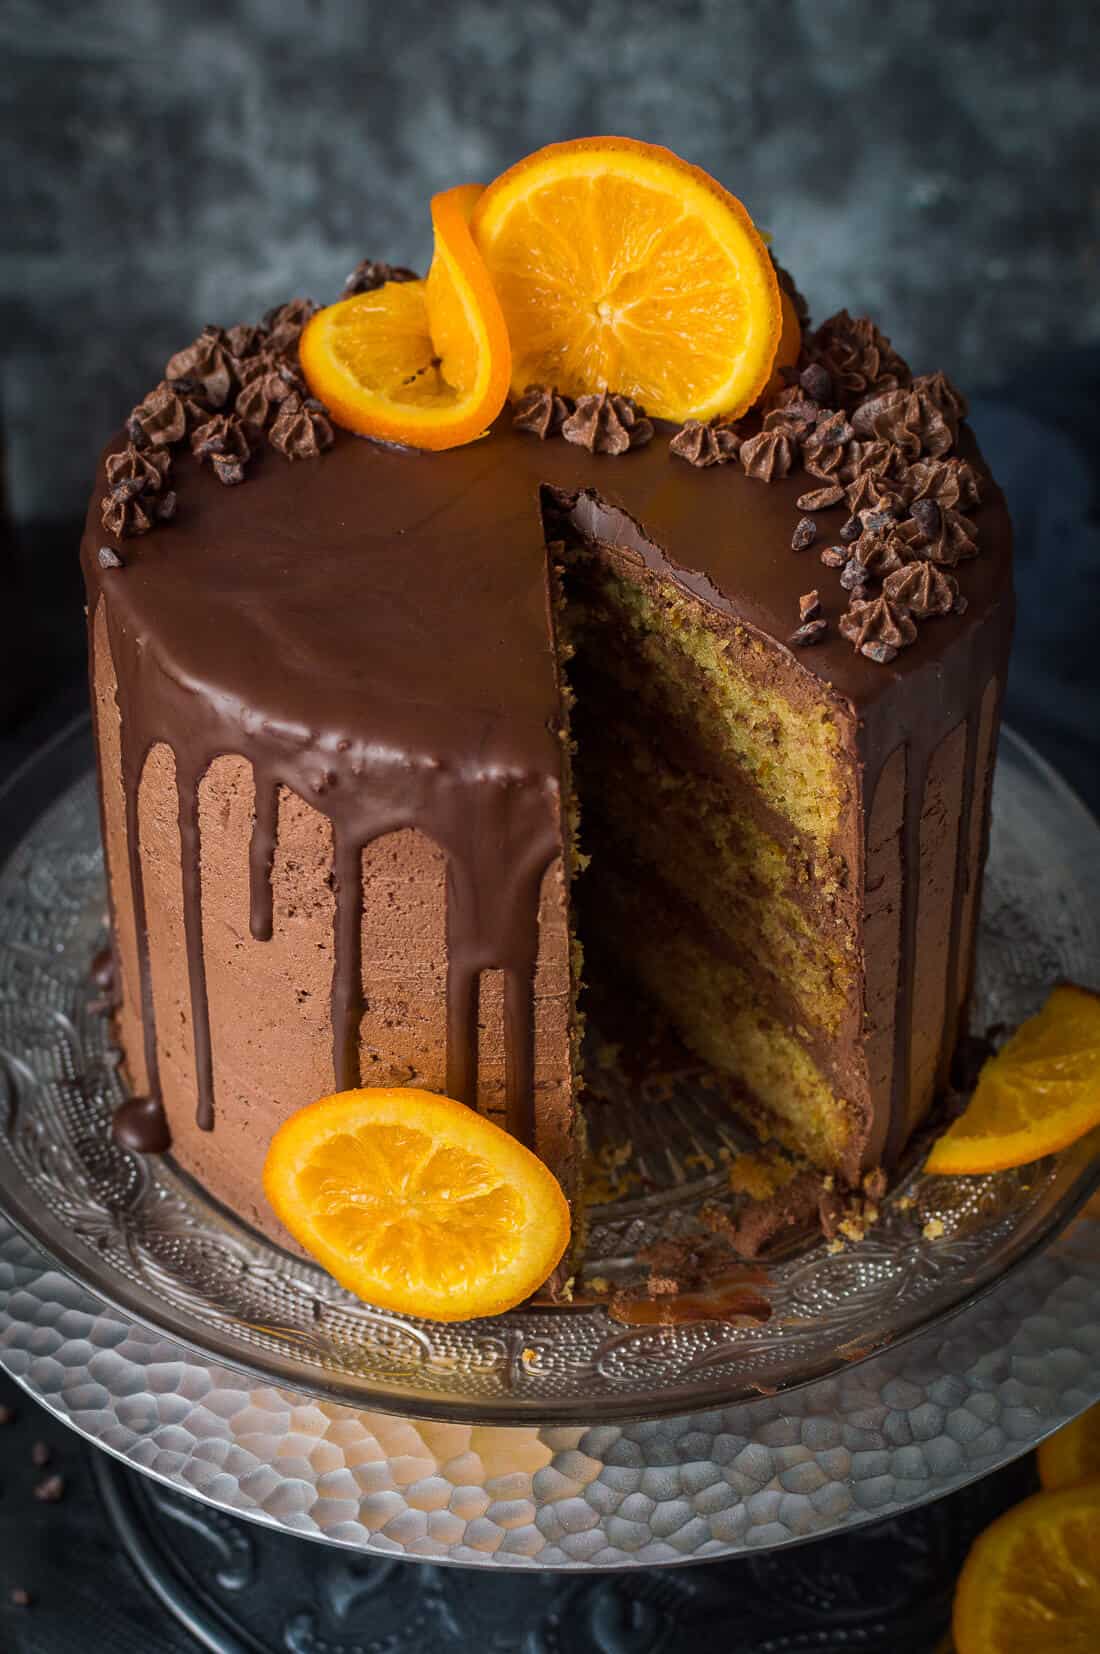 Vegan orange and almond layer cake with chocolate buttercream and candied oranges on a silver cake stand with a slice taken out.